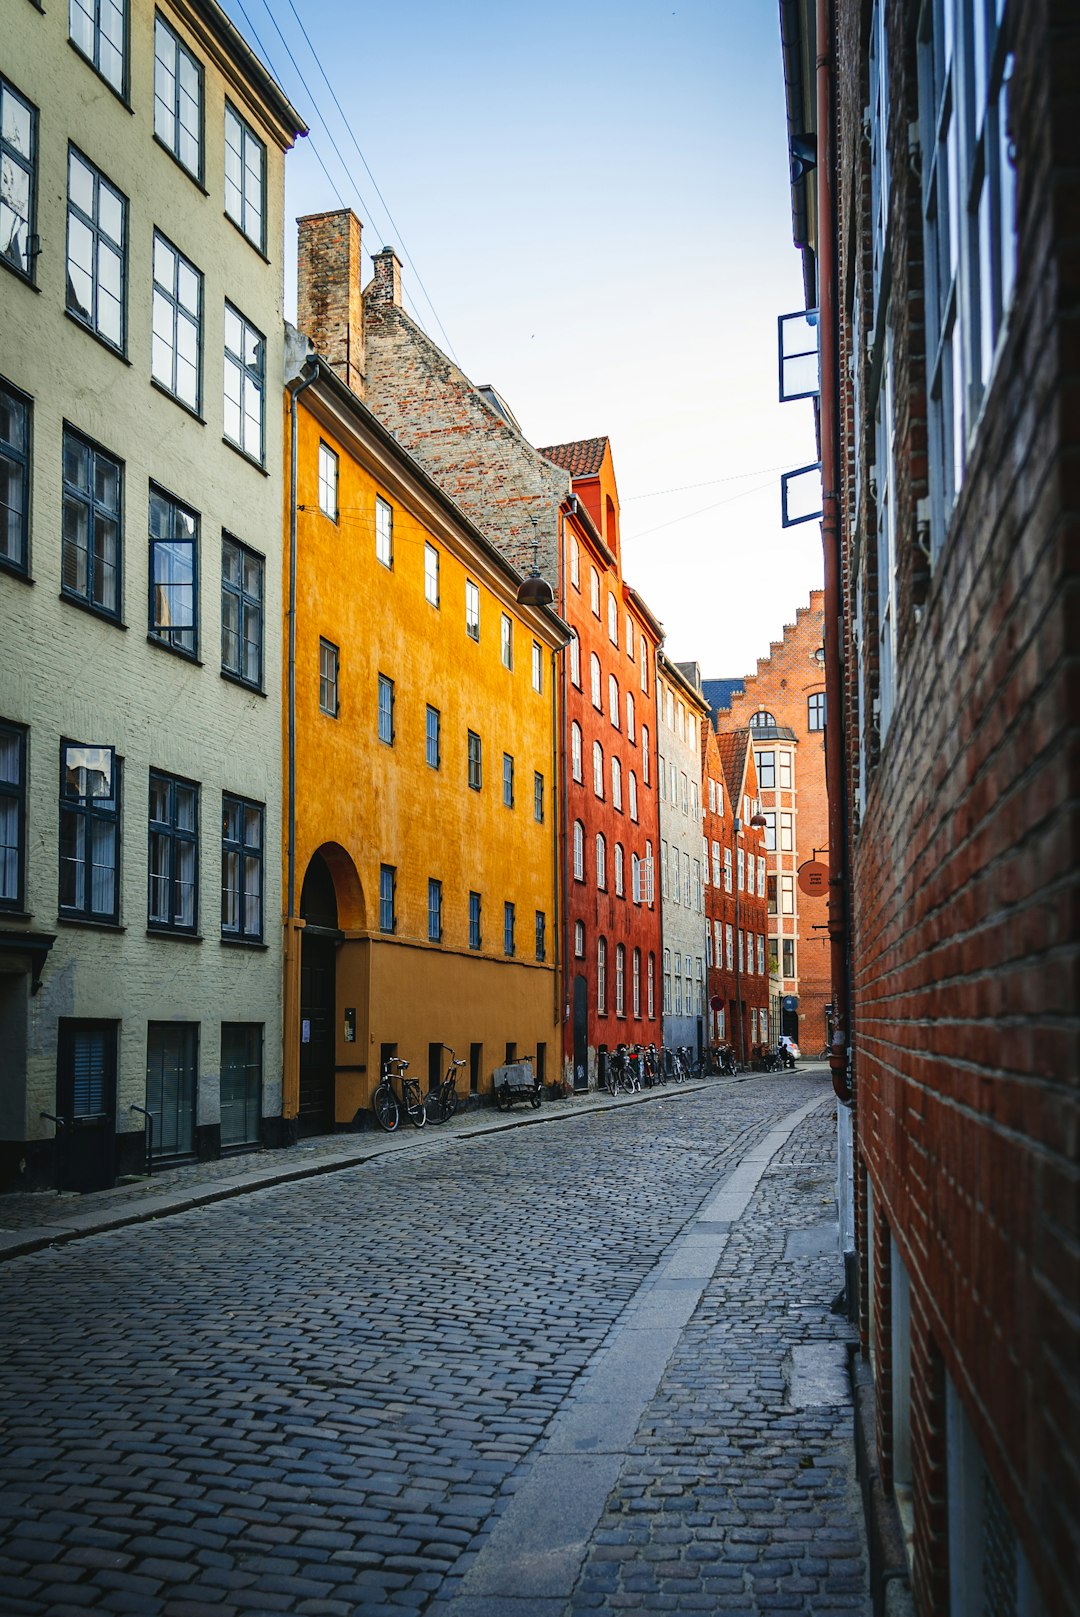 Travel Tips and Stories of Magstræde in Denmark